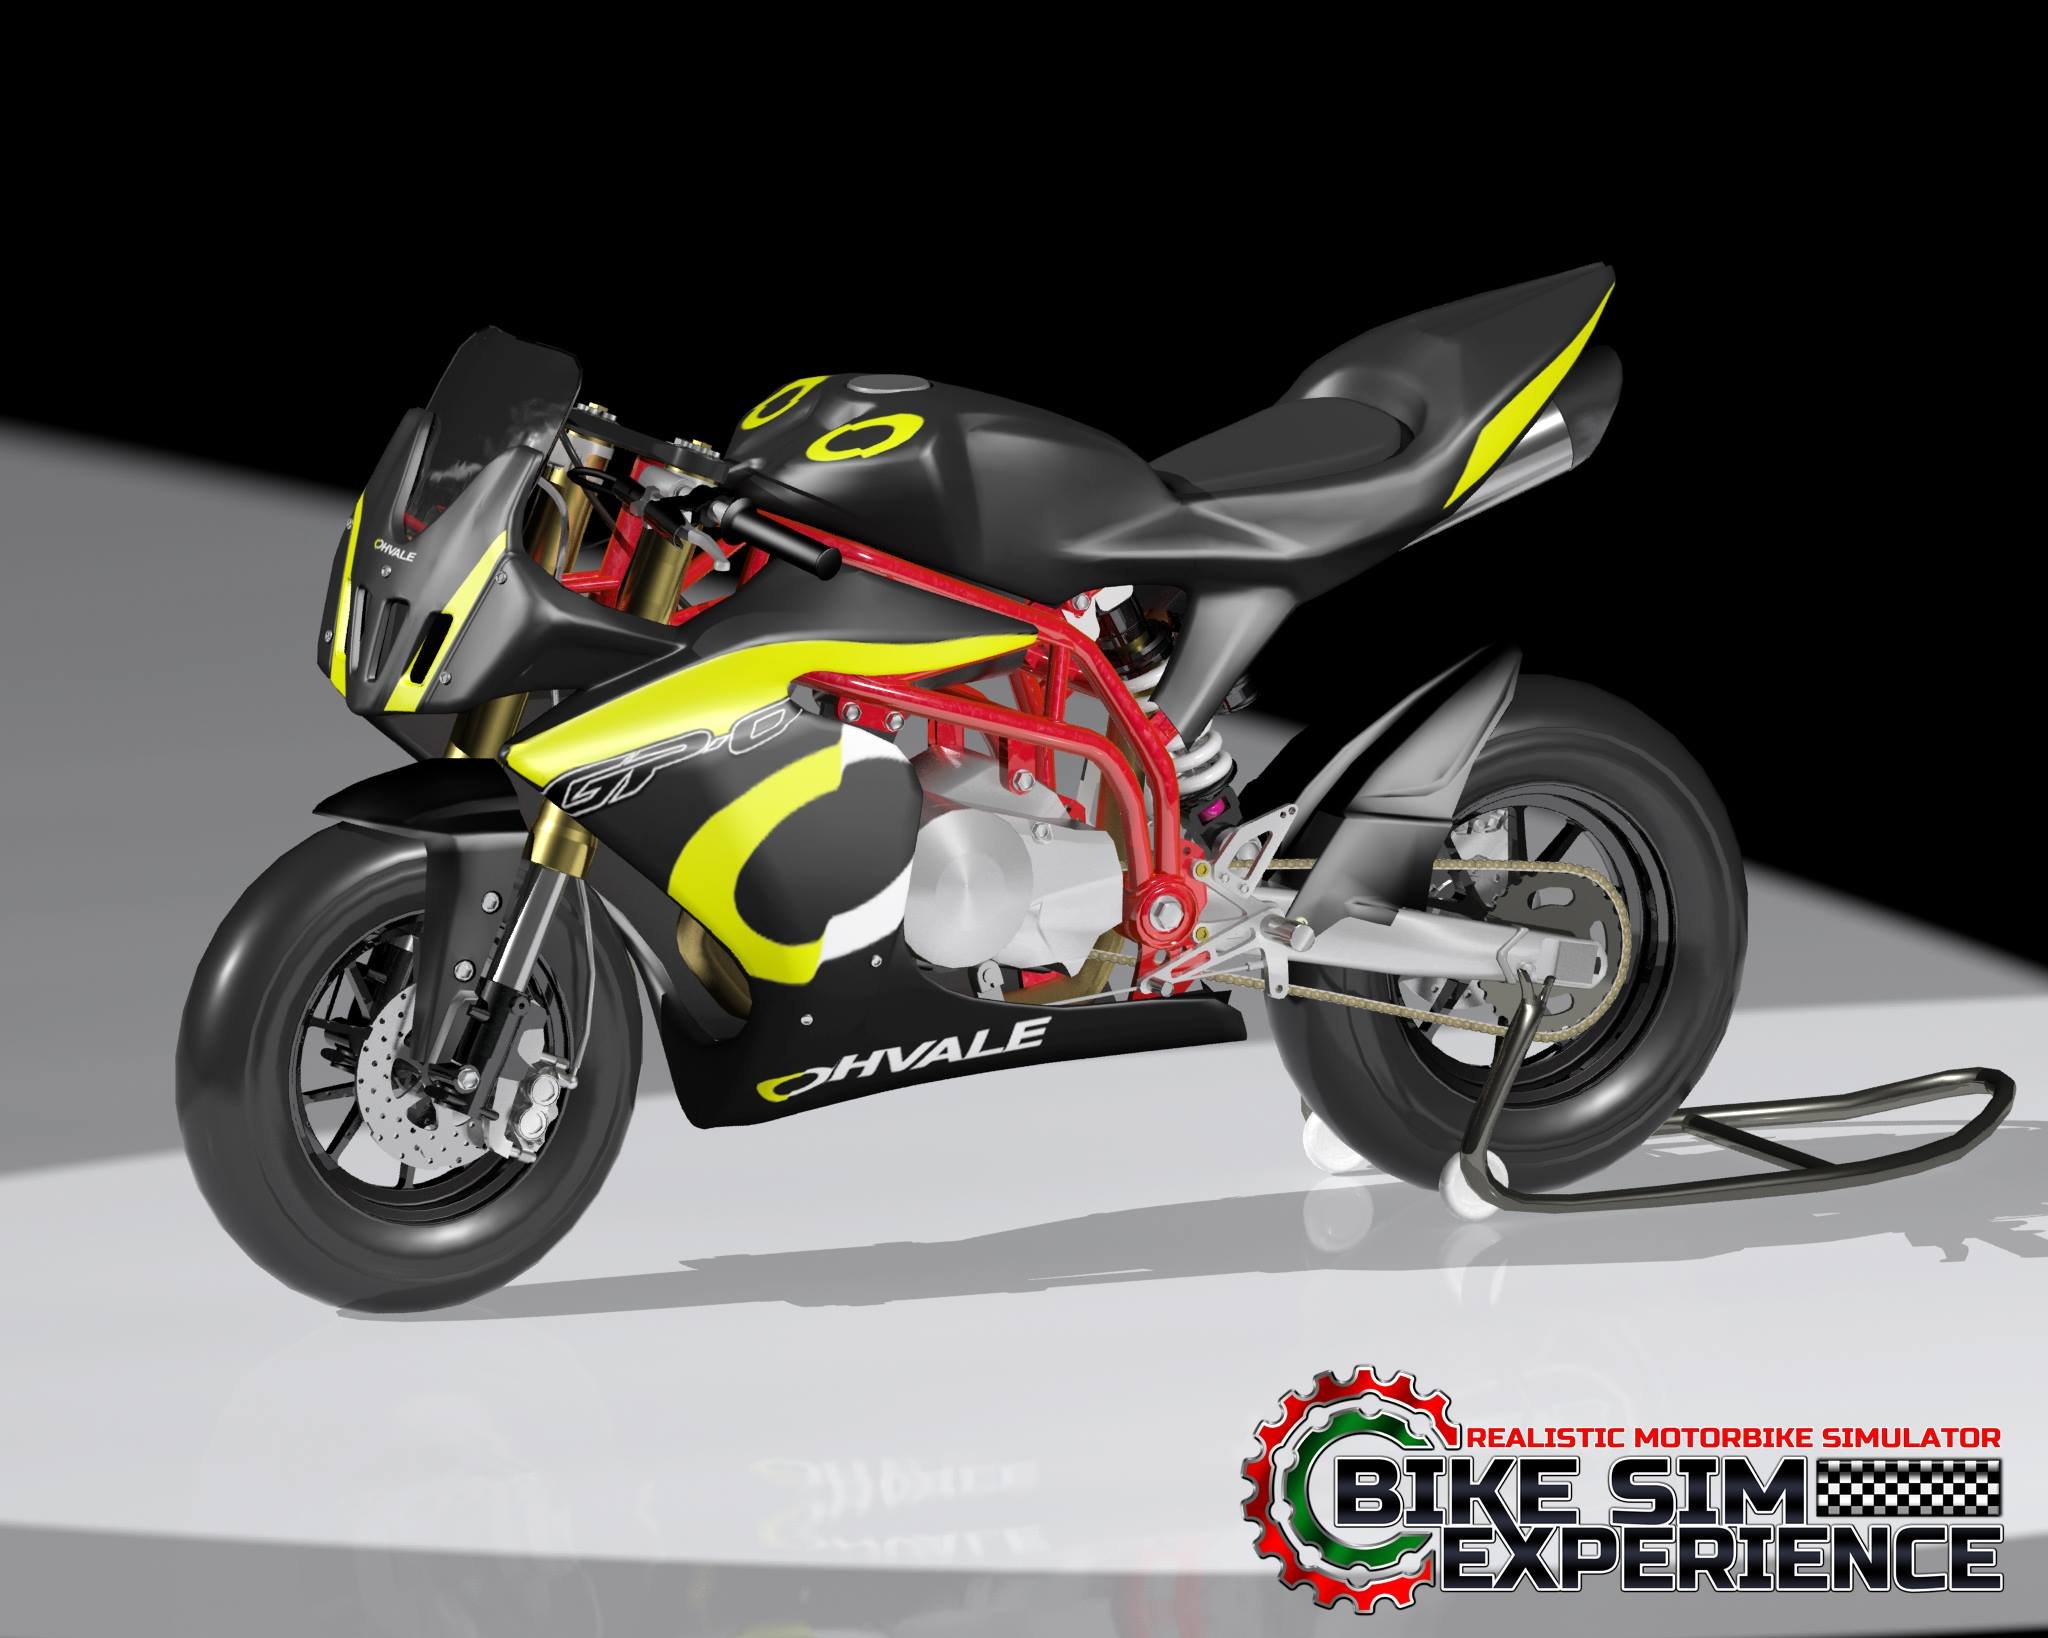 More information about "OHVALE partner ufficiale di Bike Sim Experience"